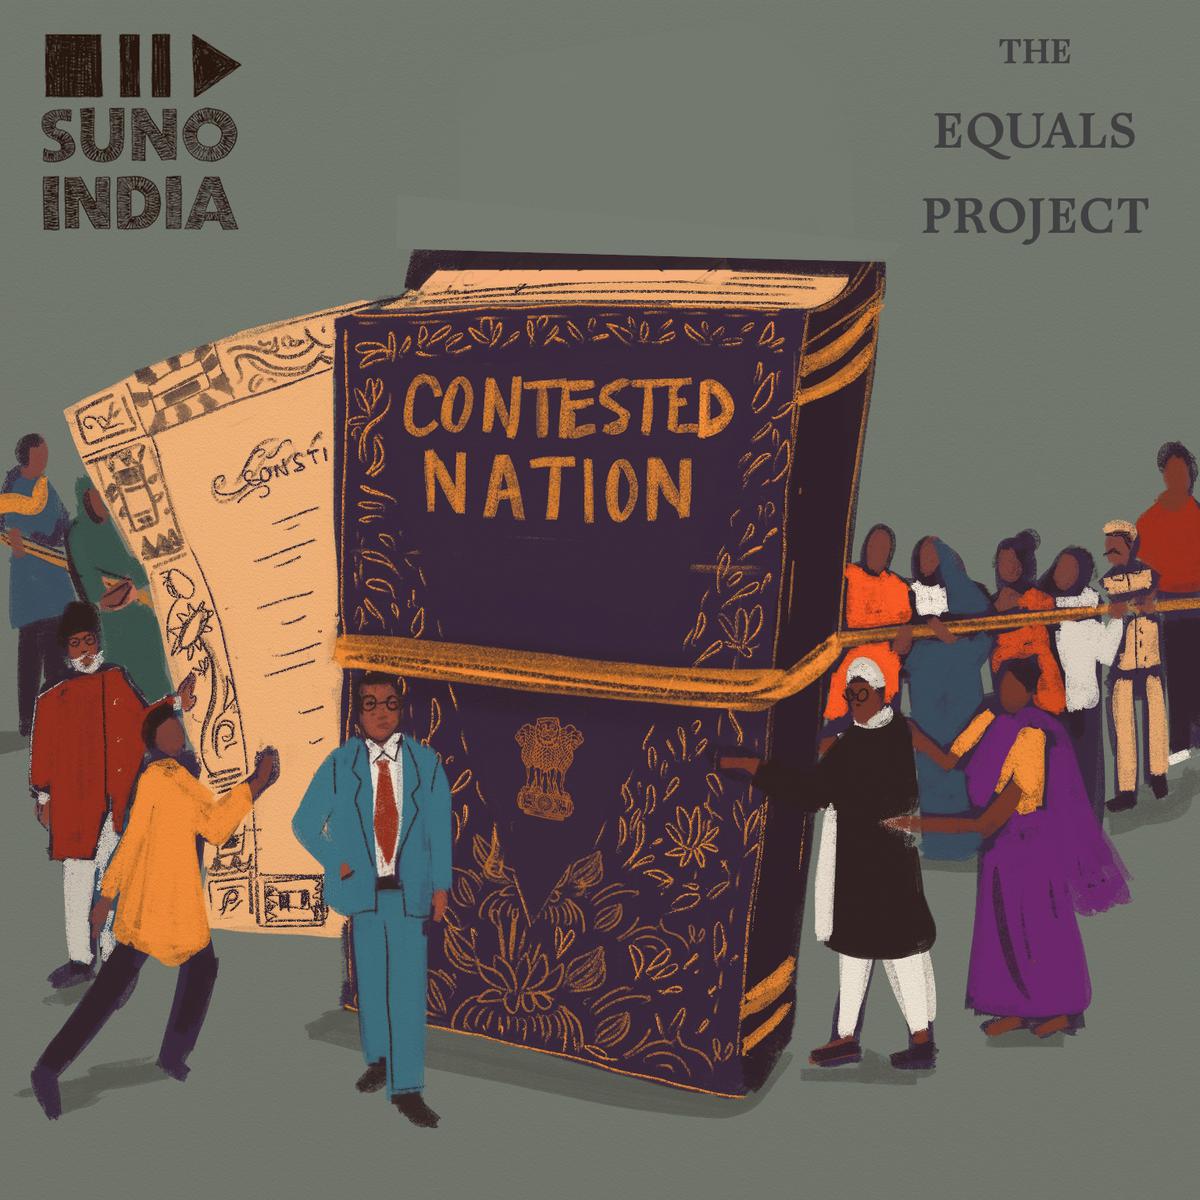 The Equals Project in collaboration with Suno India has brought out the series of podcasts